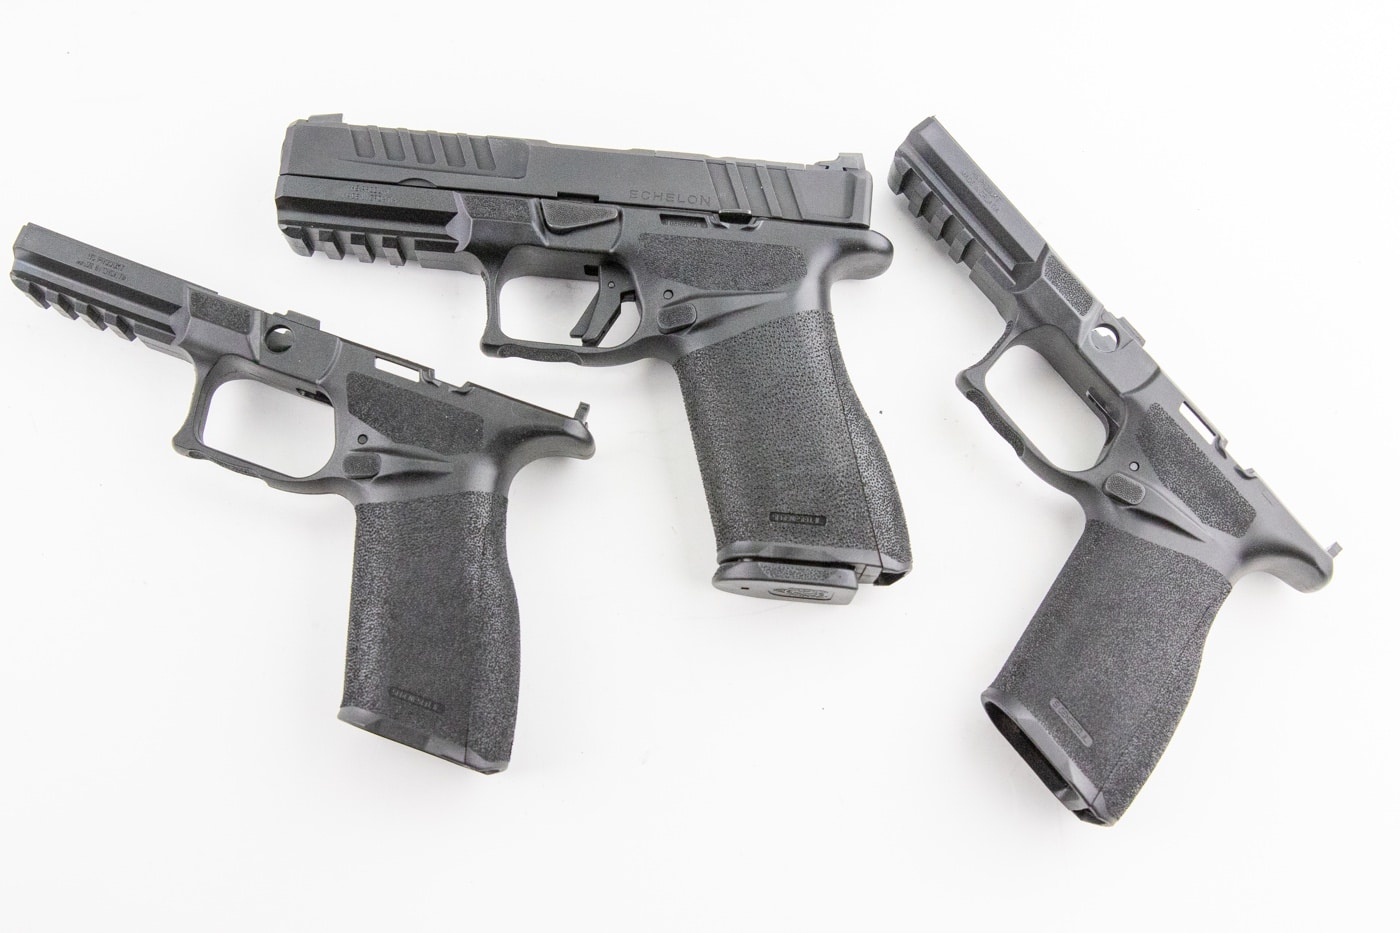 The Echelon could be another polymer 9mm, but Springfield Armory decided to make it the best duty pistol on the market. At the heart of the Echelon is the COG Central Operating Group. Some consider it the most important feature of the Echelon.